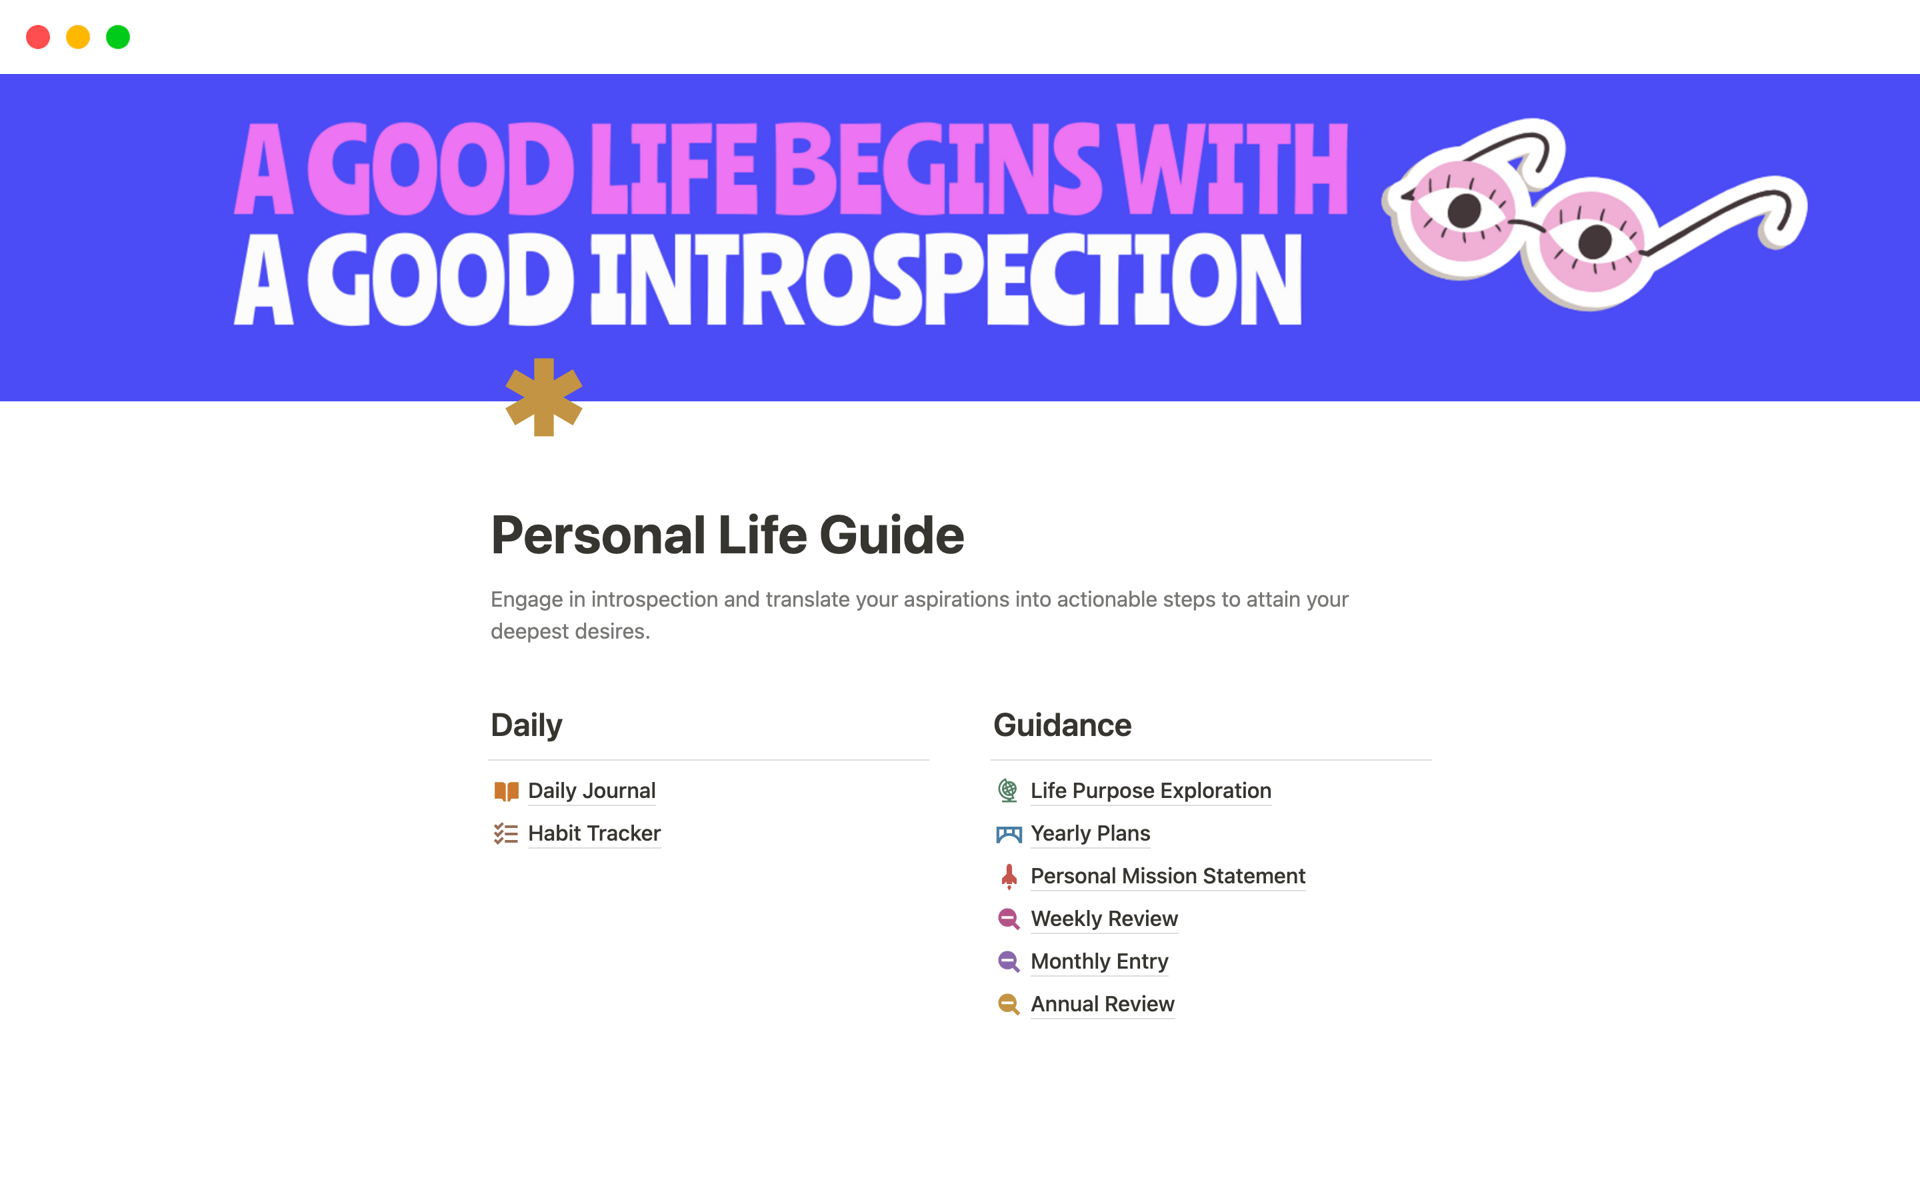 This template provides comprehensive tools and guidance for daily reflection, habit tracking, life purpose discovery, goal planning, mission statement crafting, and regular reviews to facilitate personal growth and goal achievement.